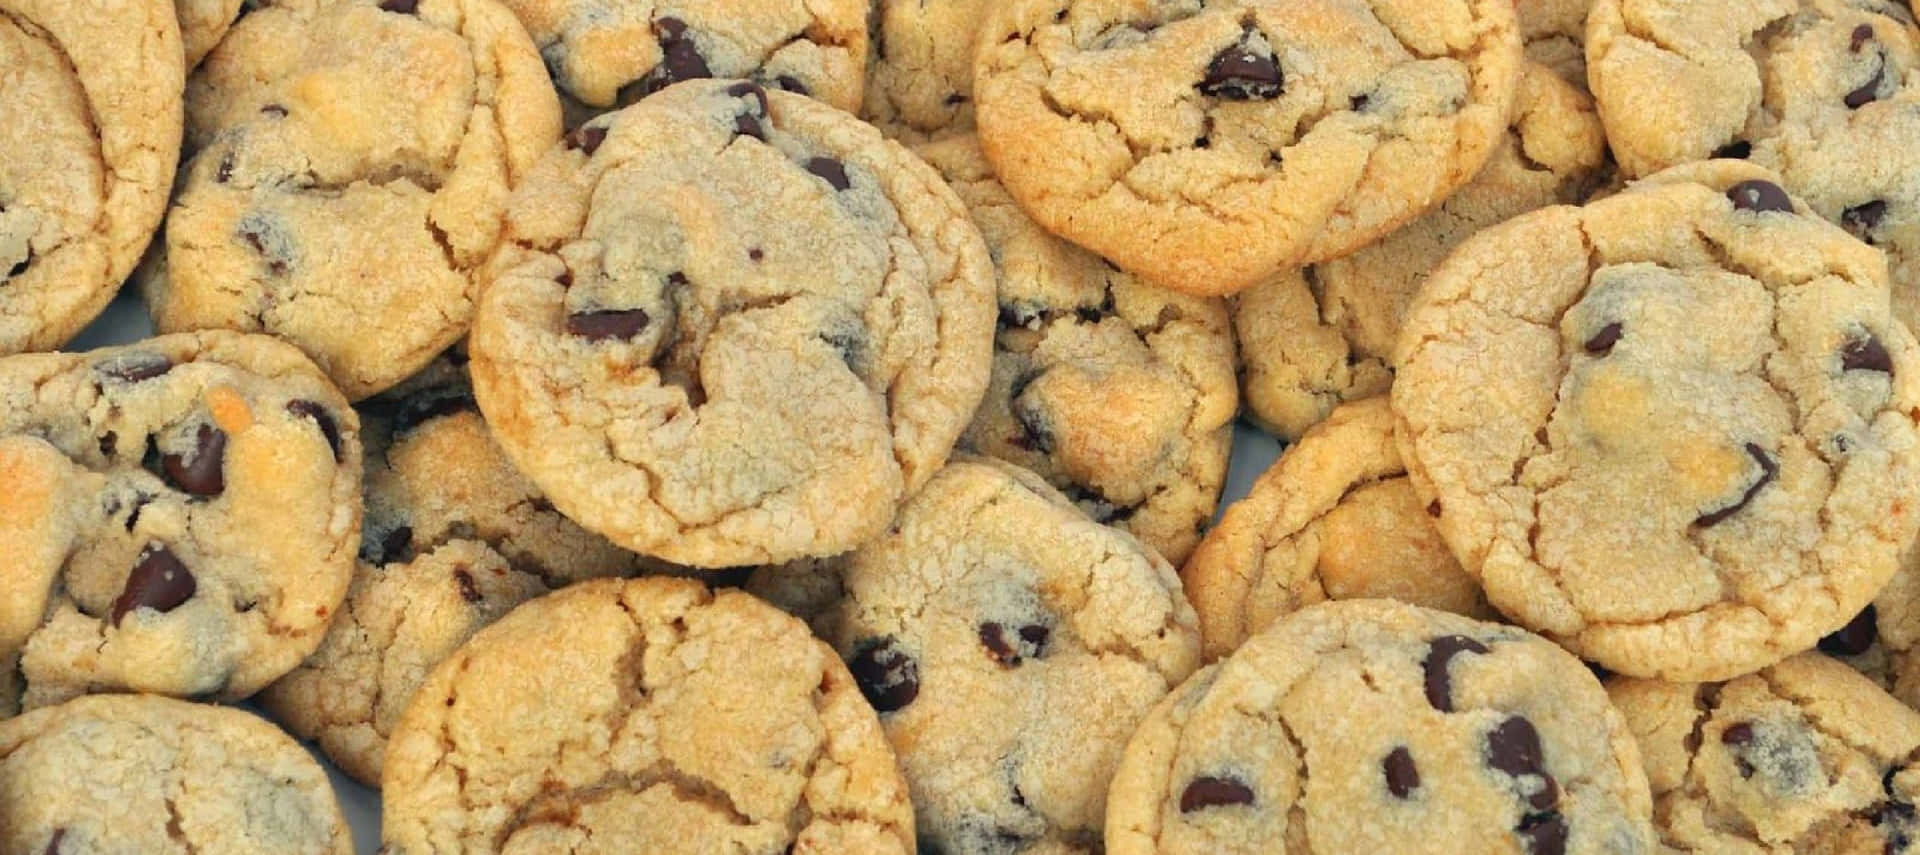 A Pile Of Chocolate Chip Cookies On A Plate